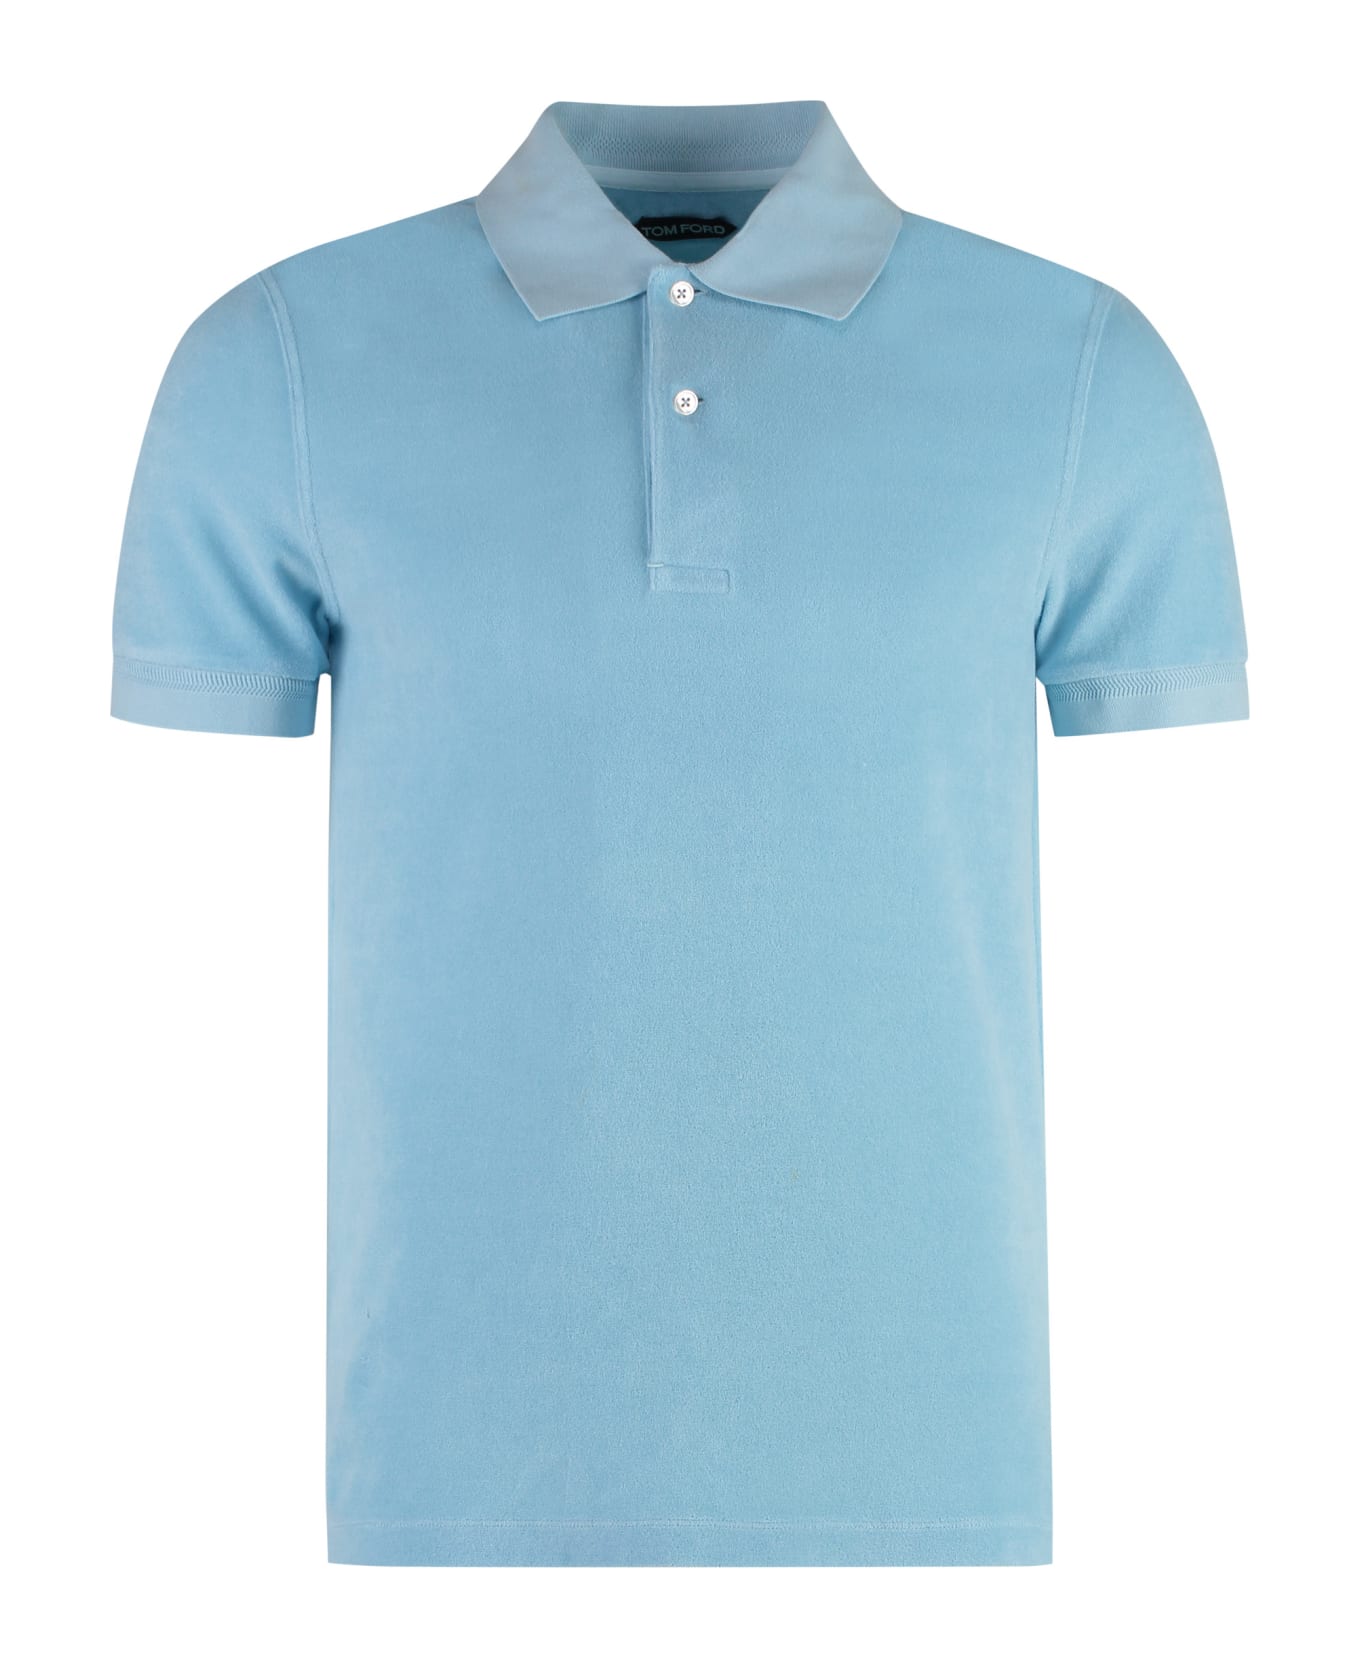 Tom Ford Short Sleeve Cotton Polo Shirt - turquoise ポロシャツ